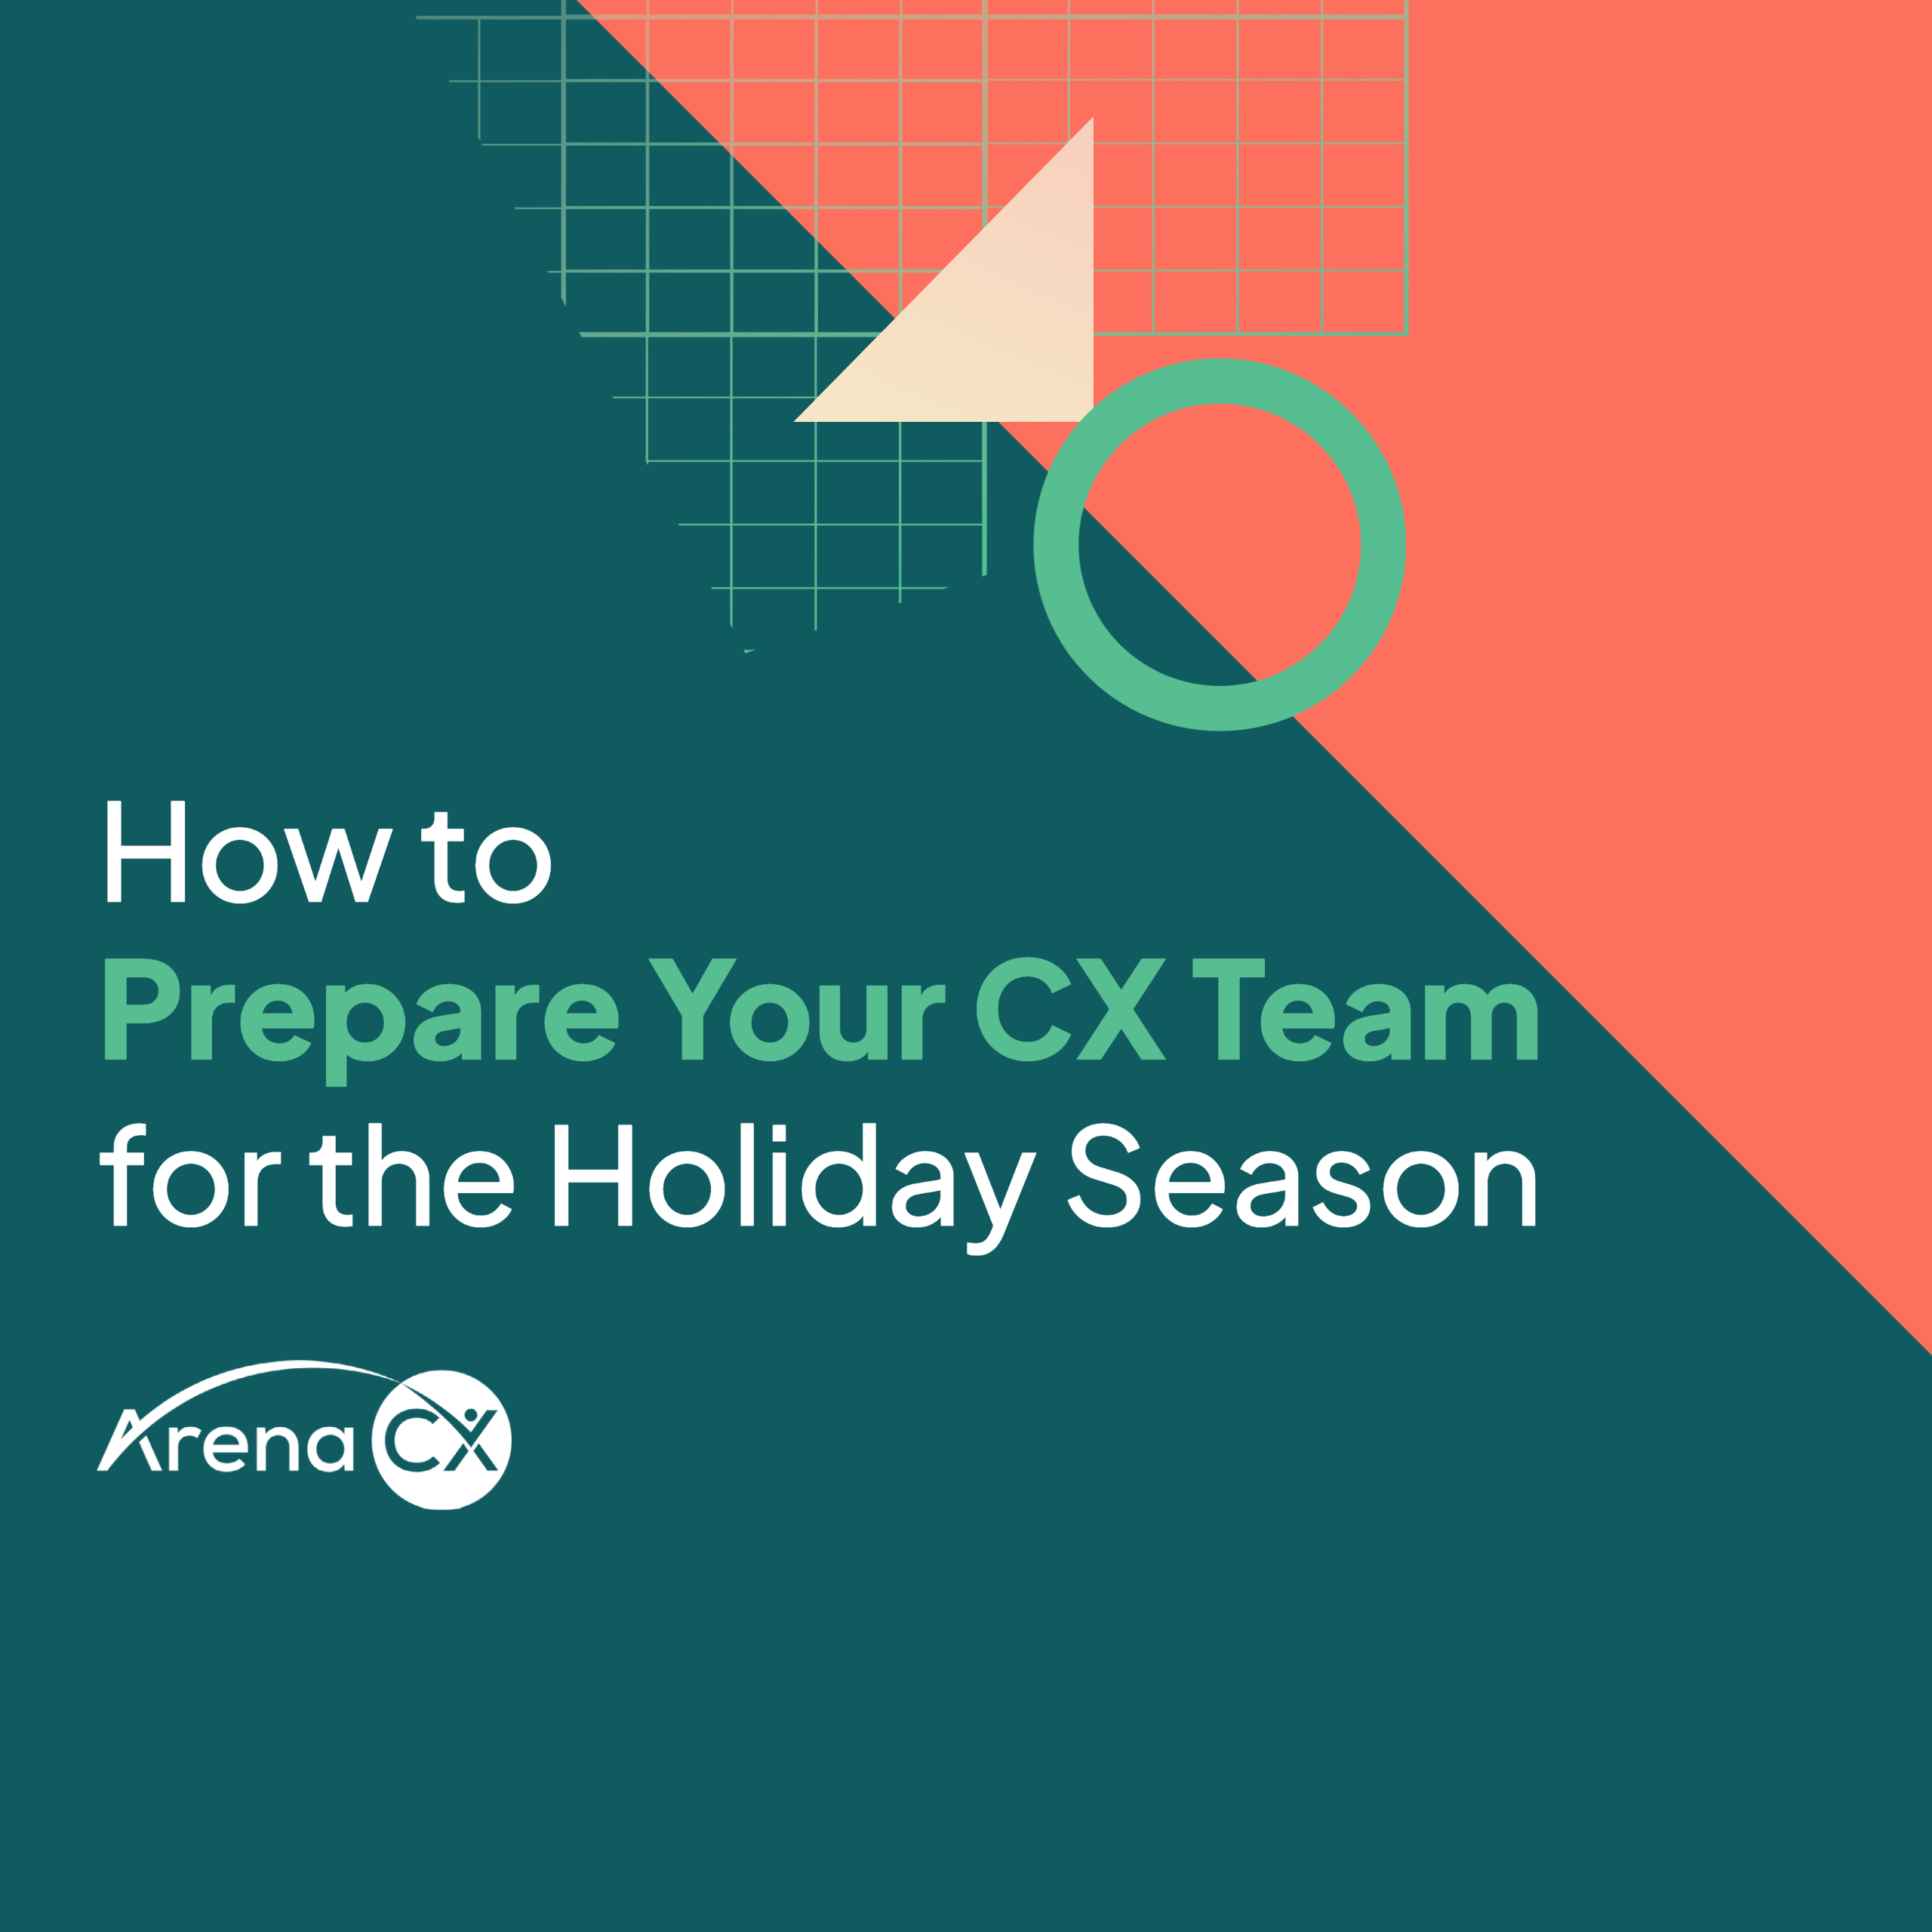 Preparing your customer service team for the holiday season and Q4